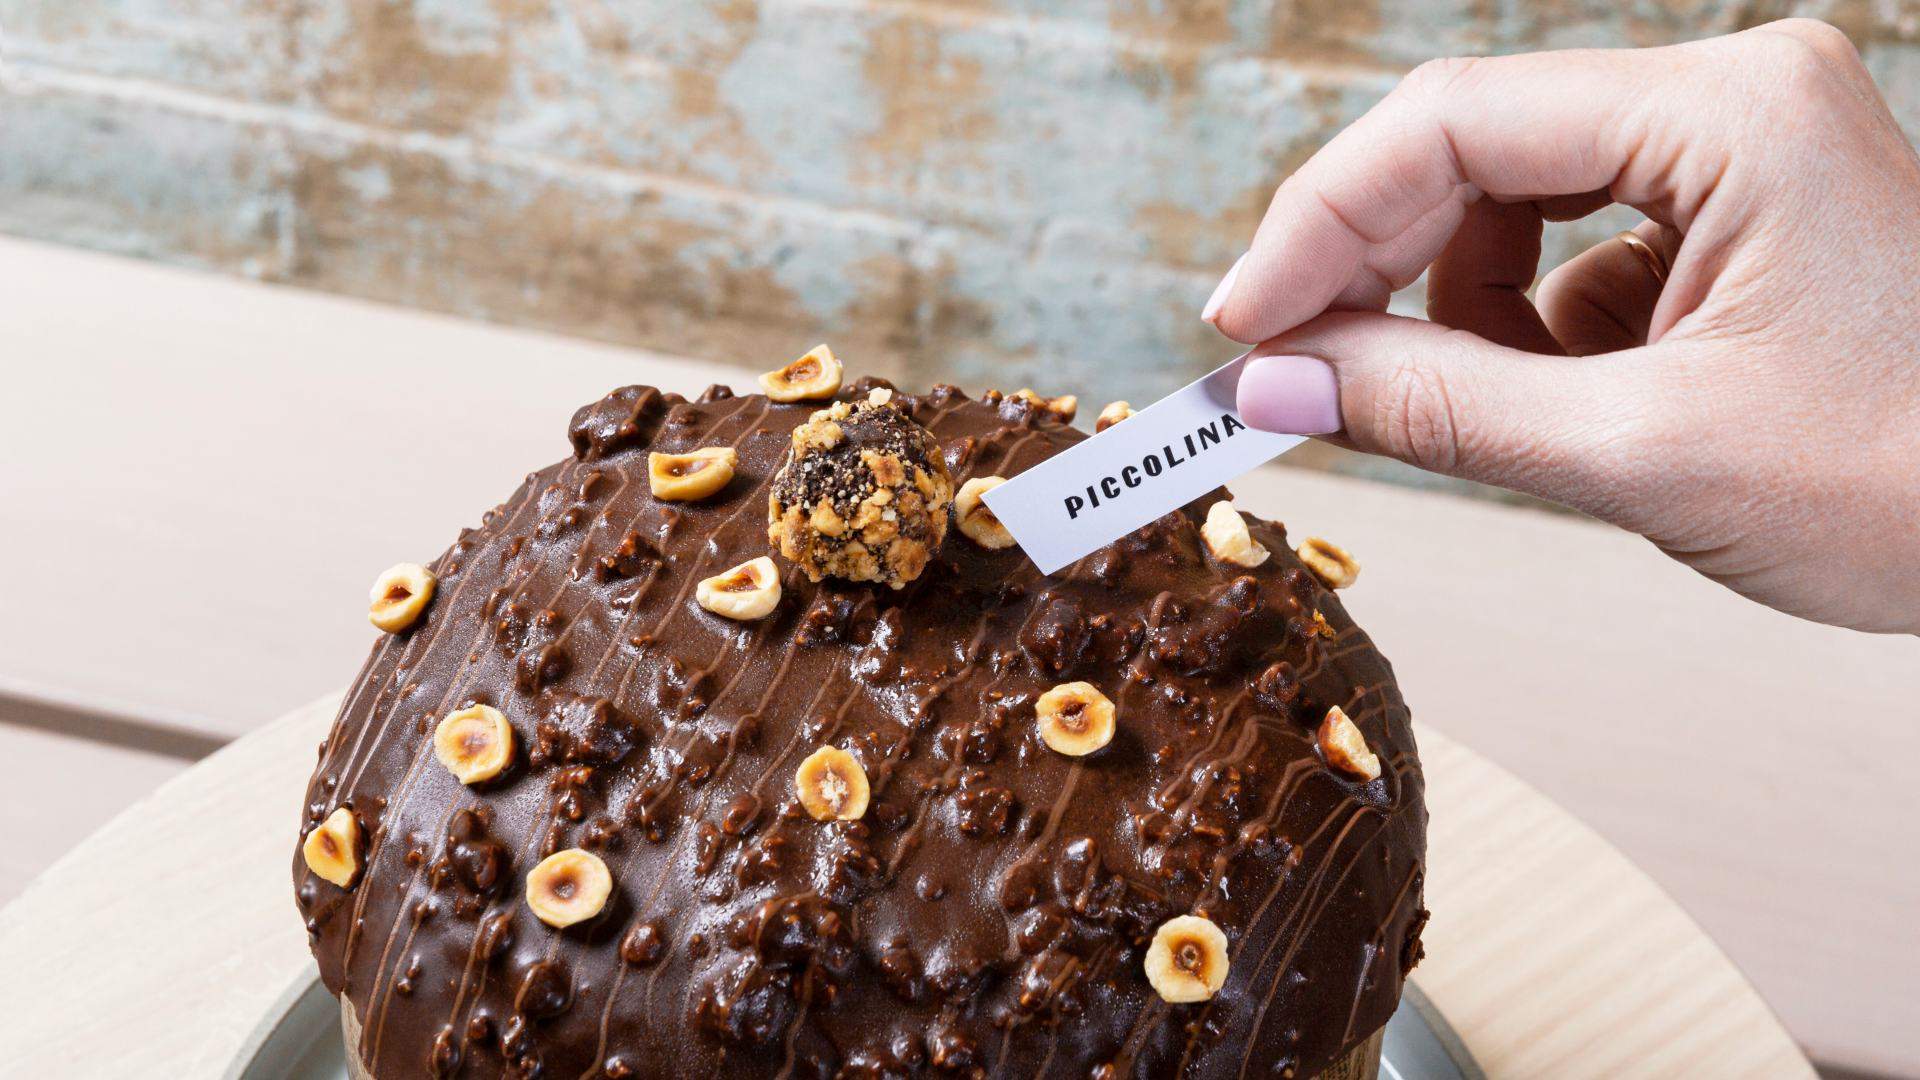 Piccolina Has Released a New Nutella Gelato-Stuffed Panettone Just in Time for Christmas